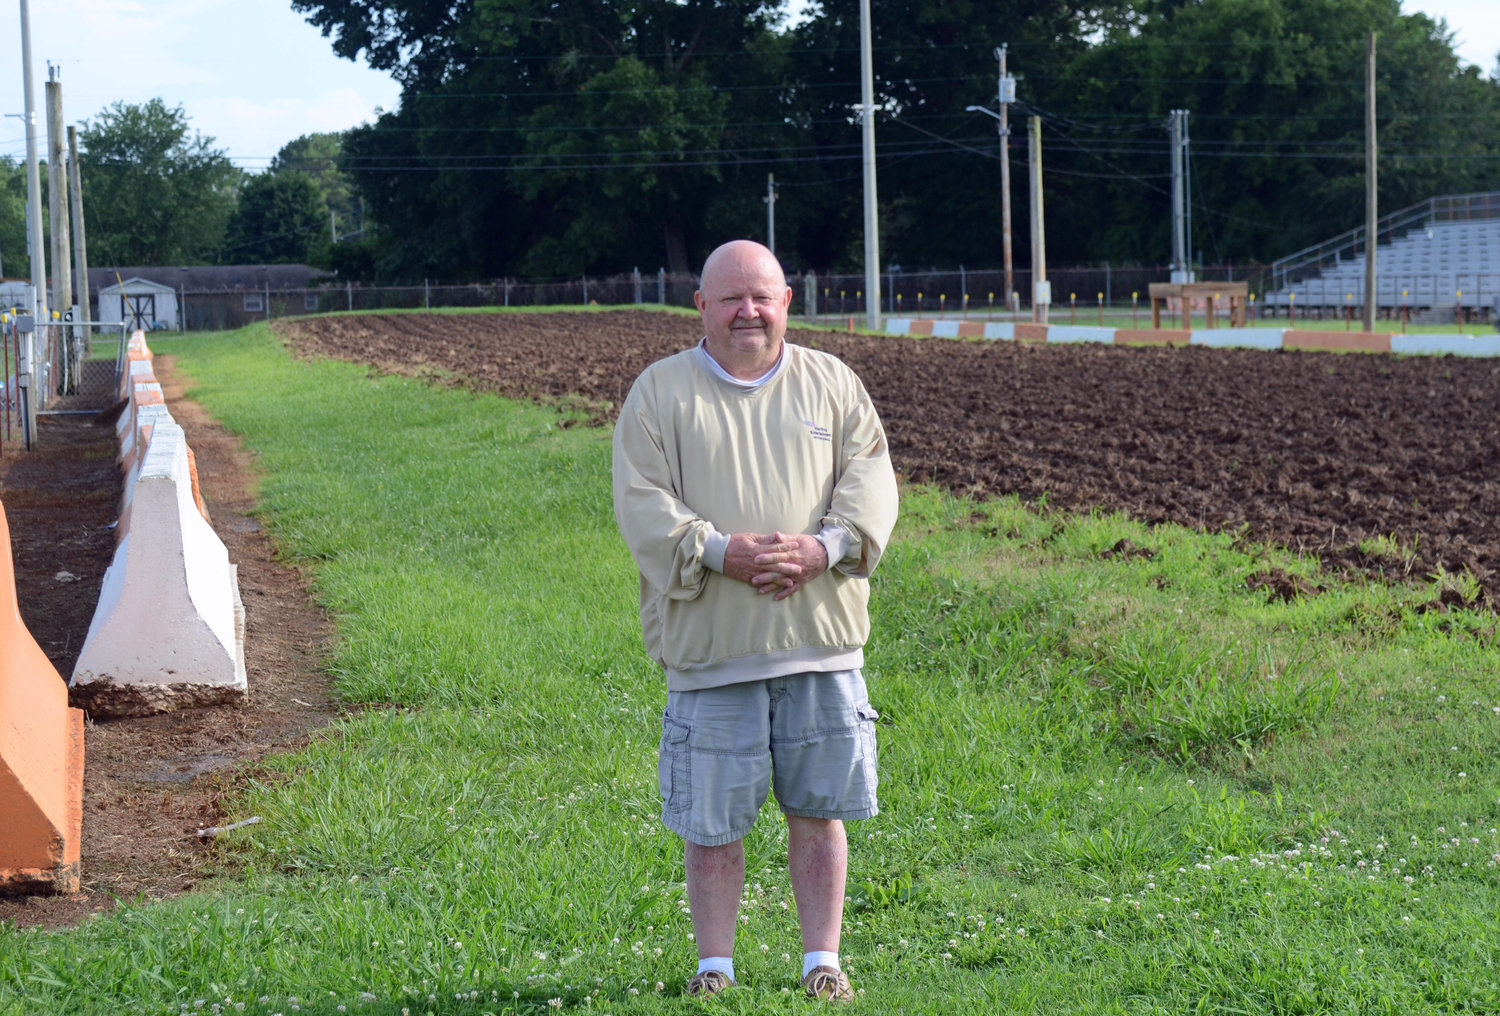 Lions Club president Ricky “Goose” Sweeney stands in front of the freshly turned over track surface at the Lions Club Motorsports Park that is always carefully manicured and readied for racing by Ken Lamb and his grounds crew.